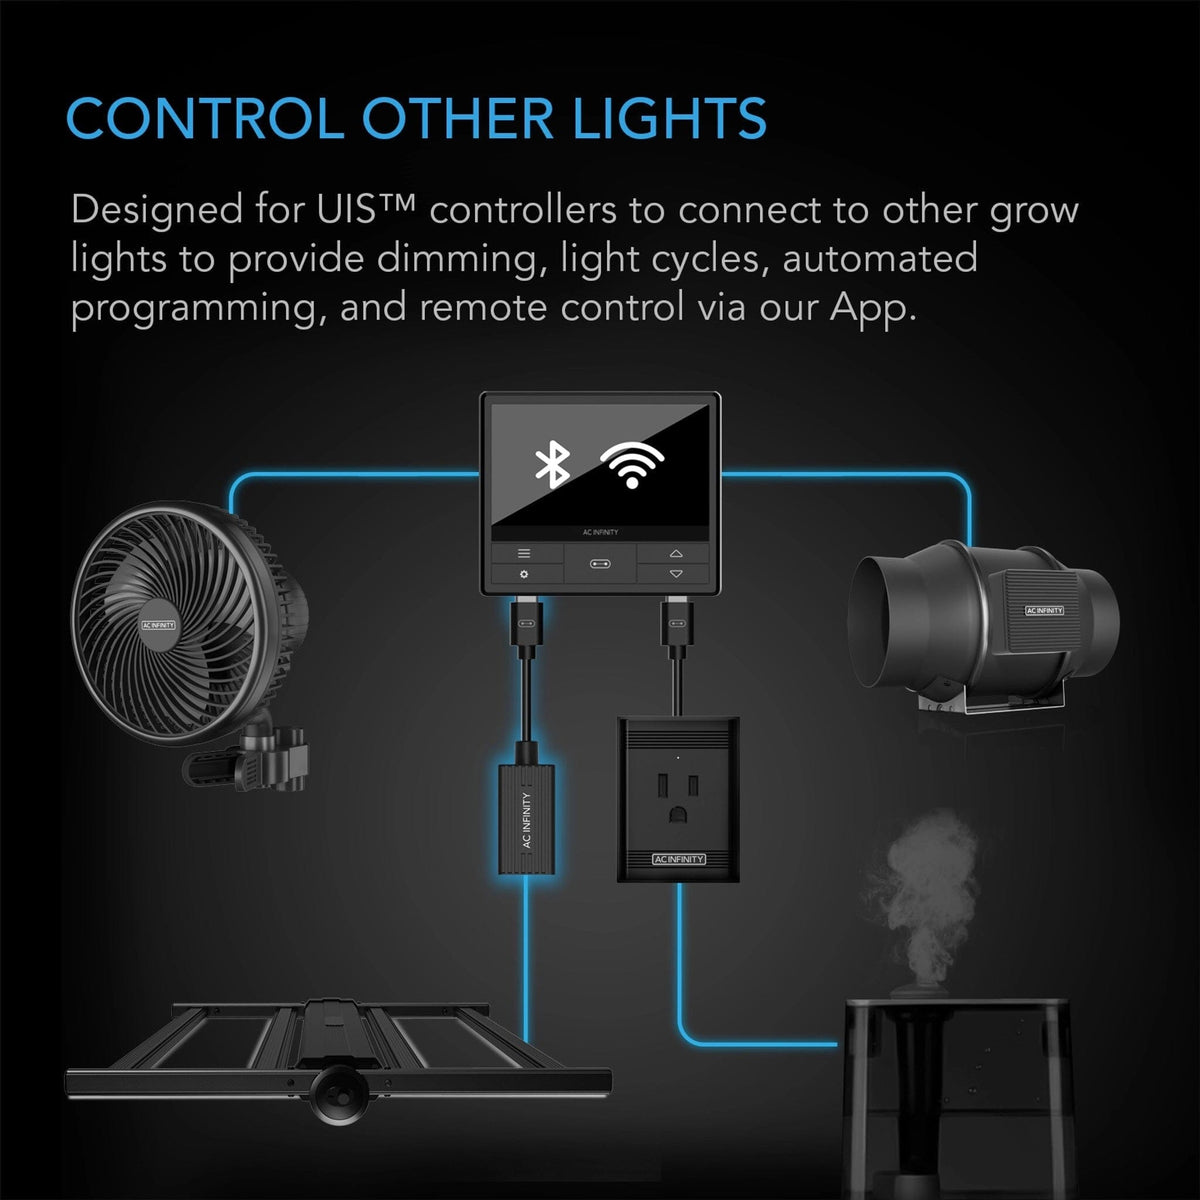 Control other lights with controller 69 PRO and others